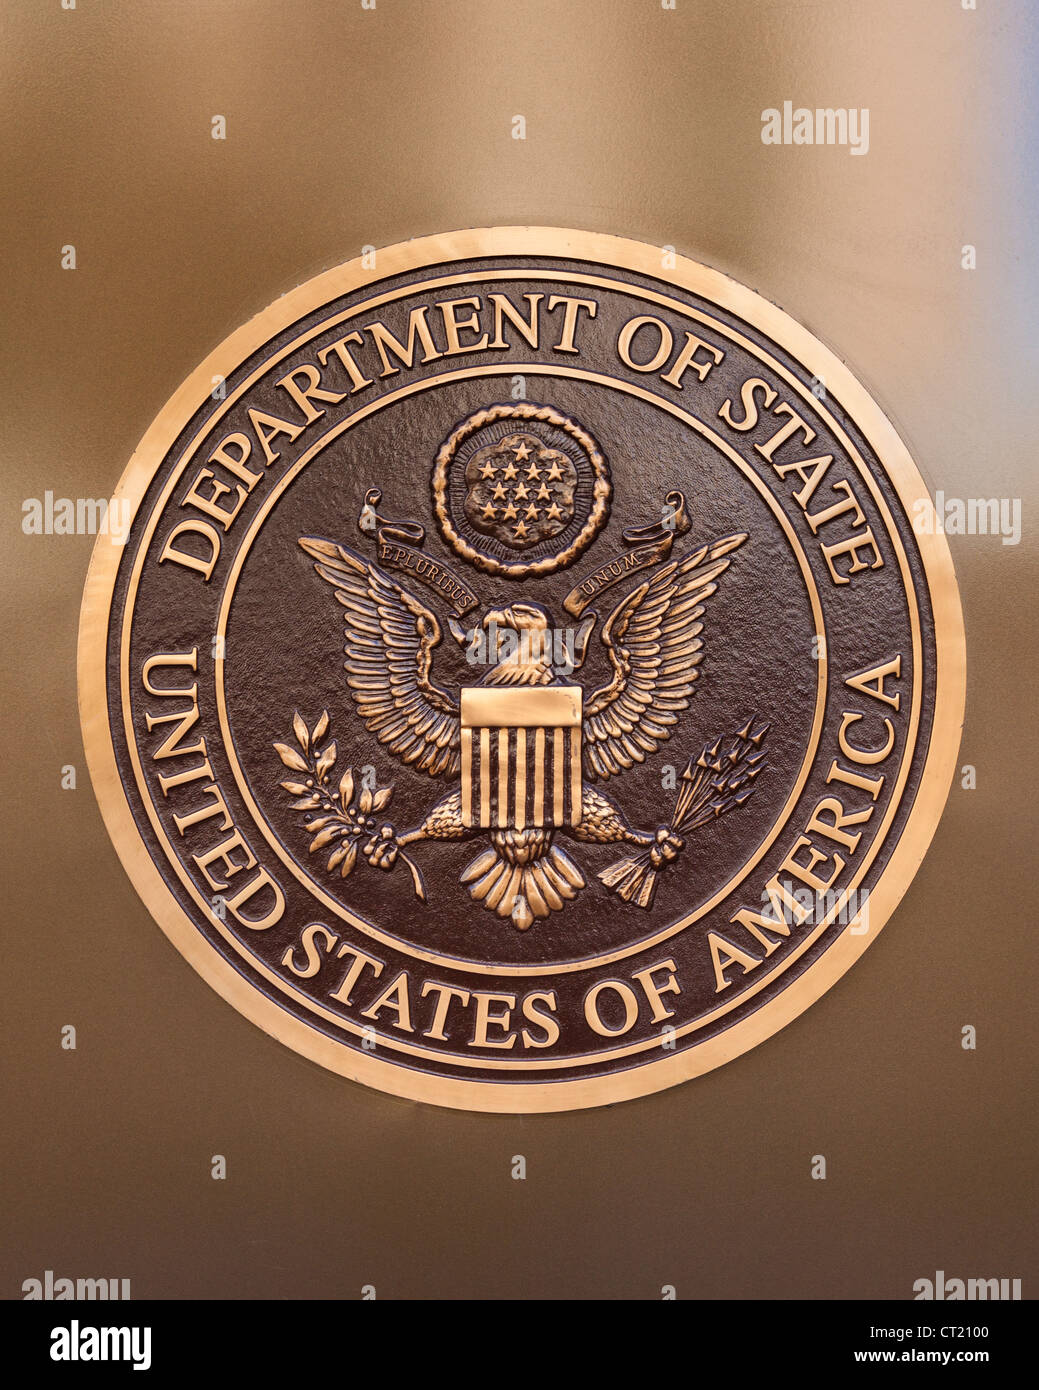 Seal of the US Department of State - Washington, DC USA Stock Photo